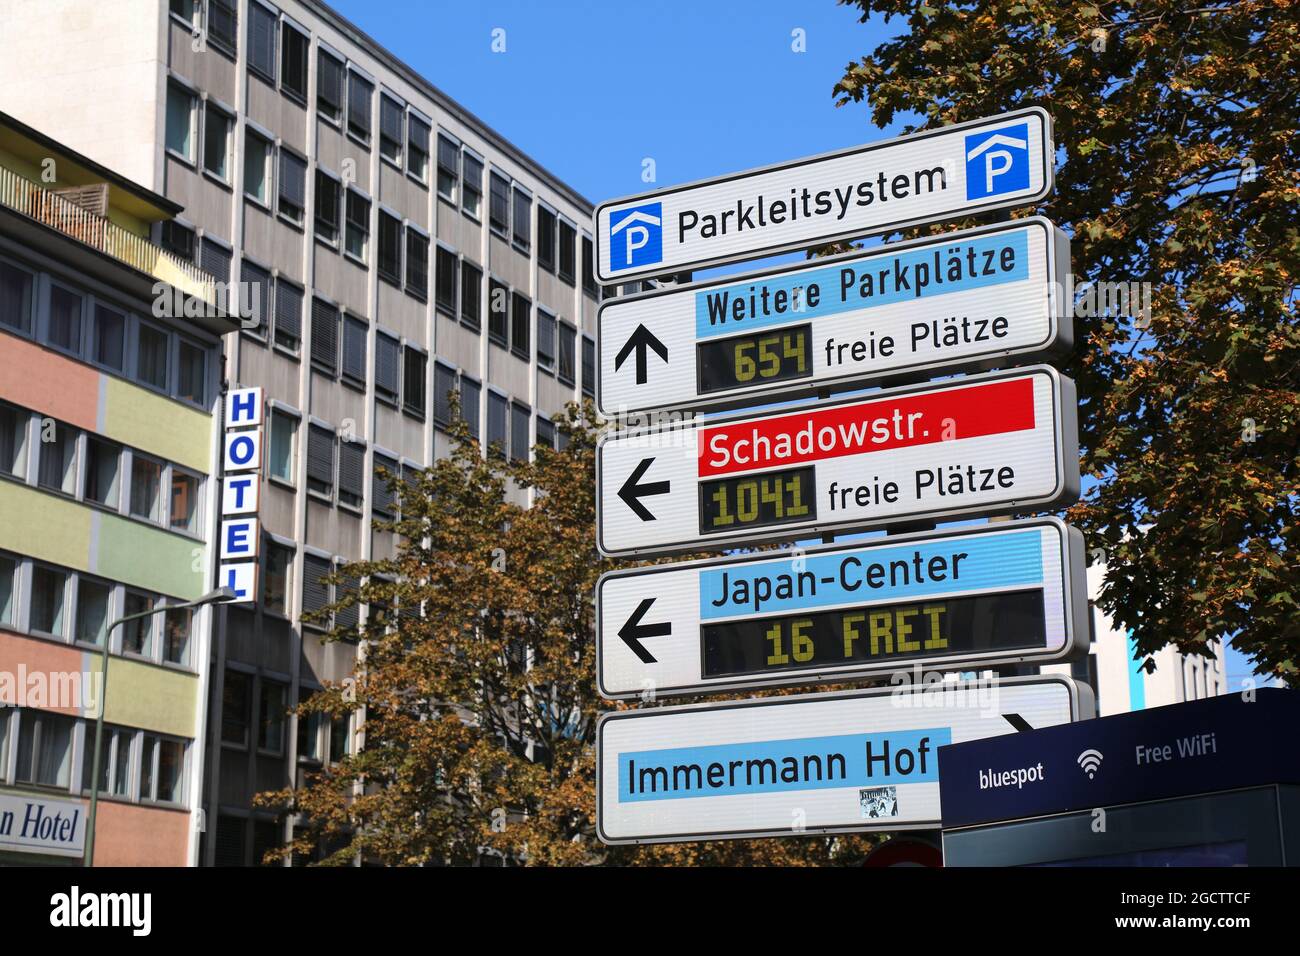 DUSSELDORF, GERMANY - SEPTEMBER 19, 2020: City parking spaces information  of Dusseldorf, Germany. Dusseldorf is the 7th largest city in Germany by po  Stock Photo - Alamy